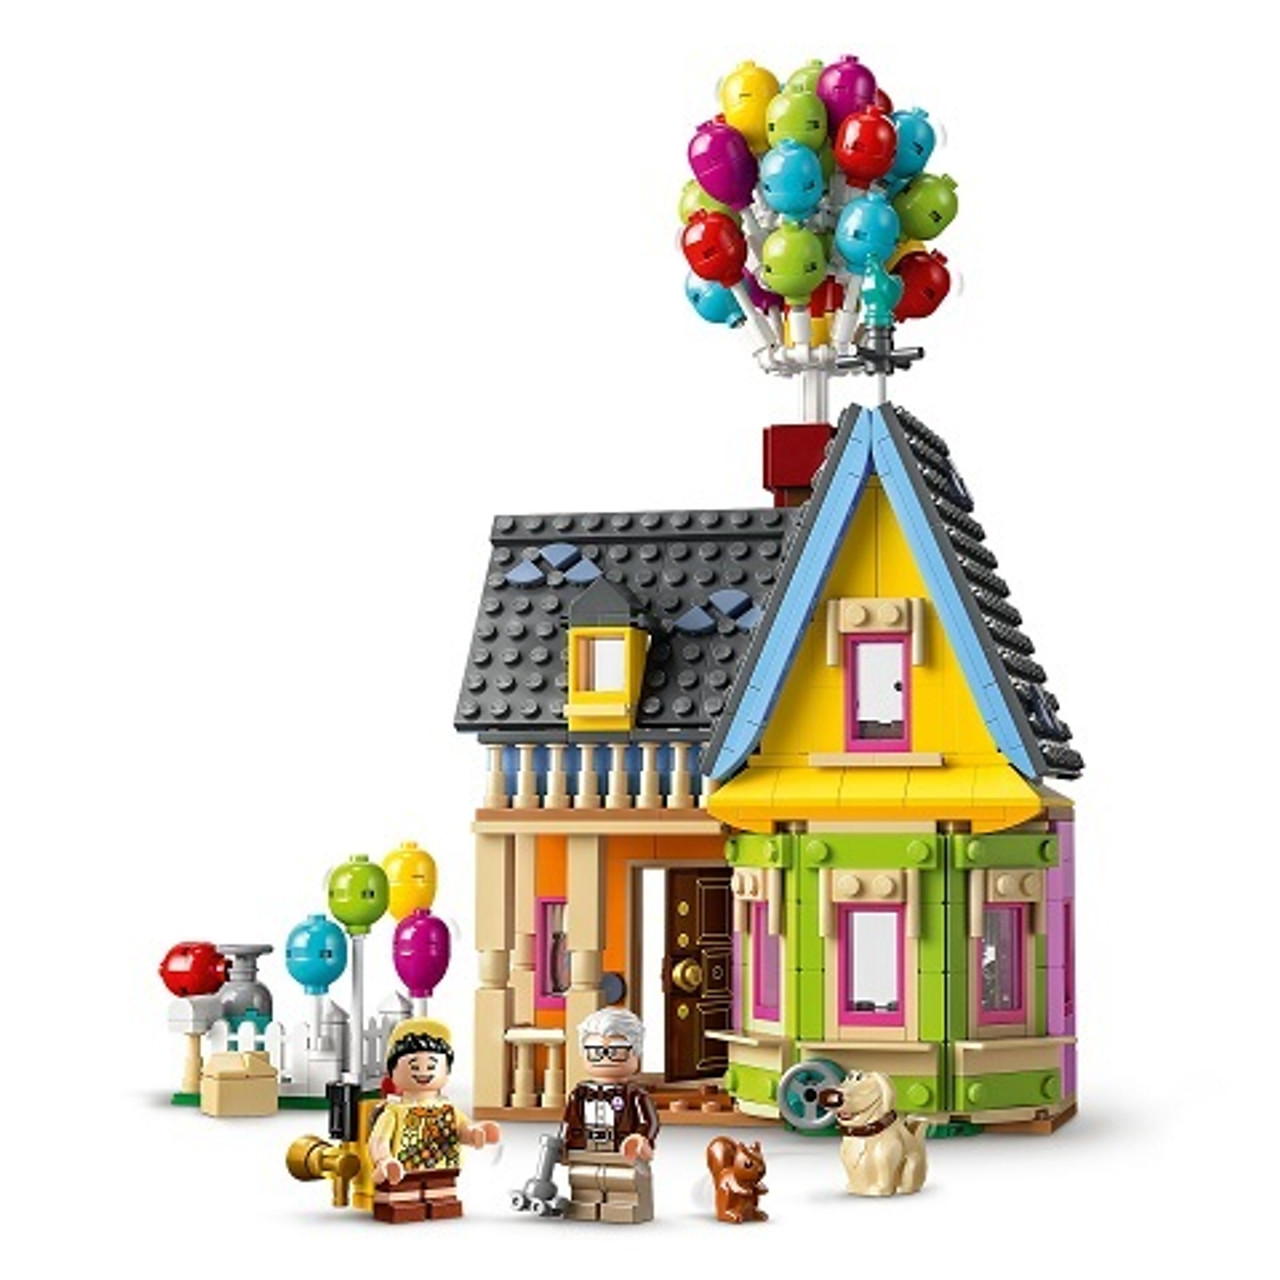 'UP' HOUSE